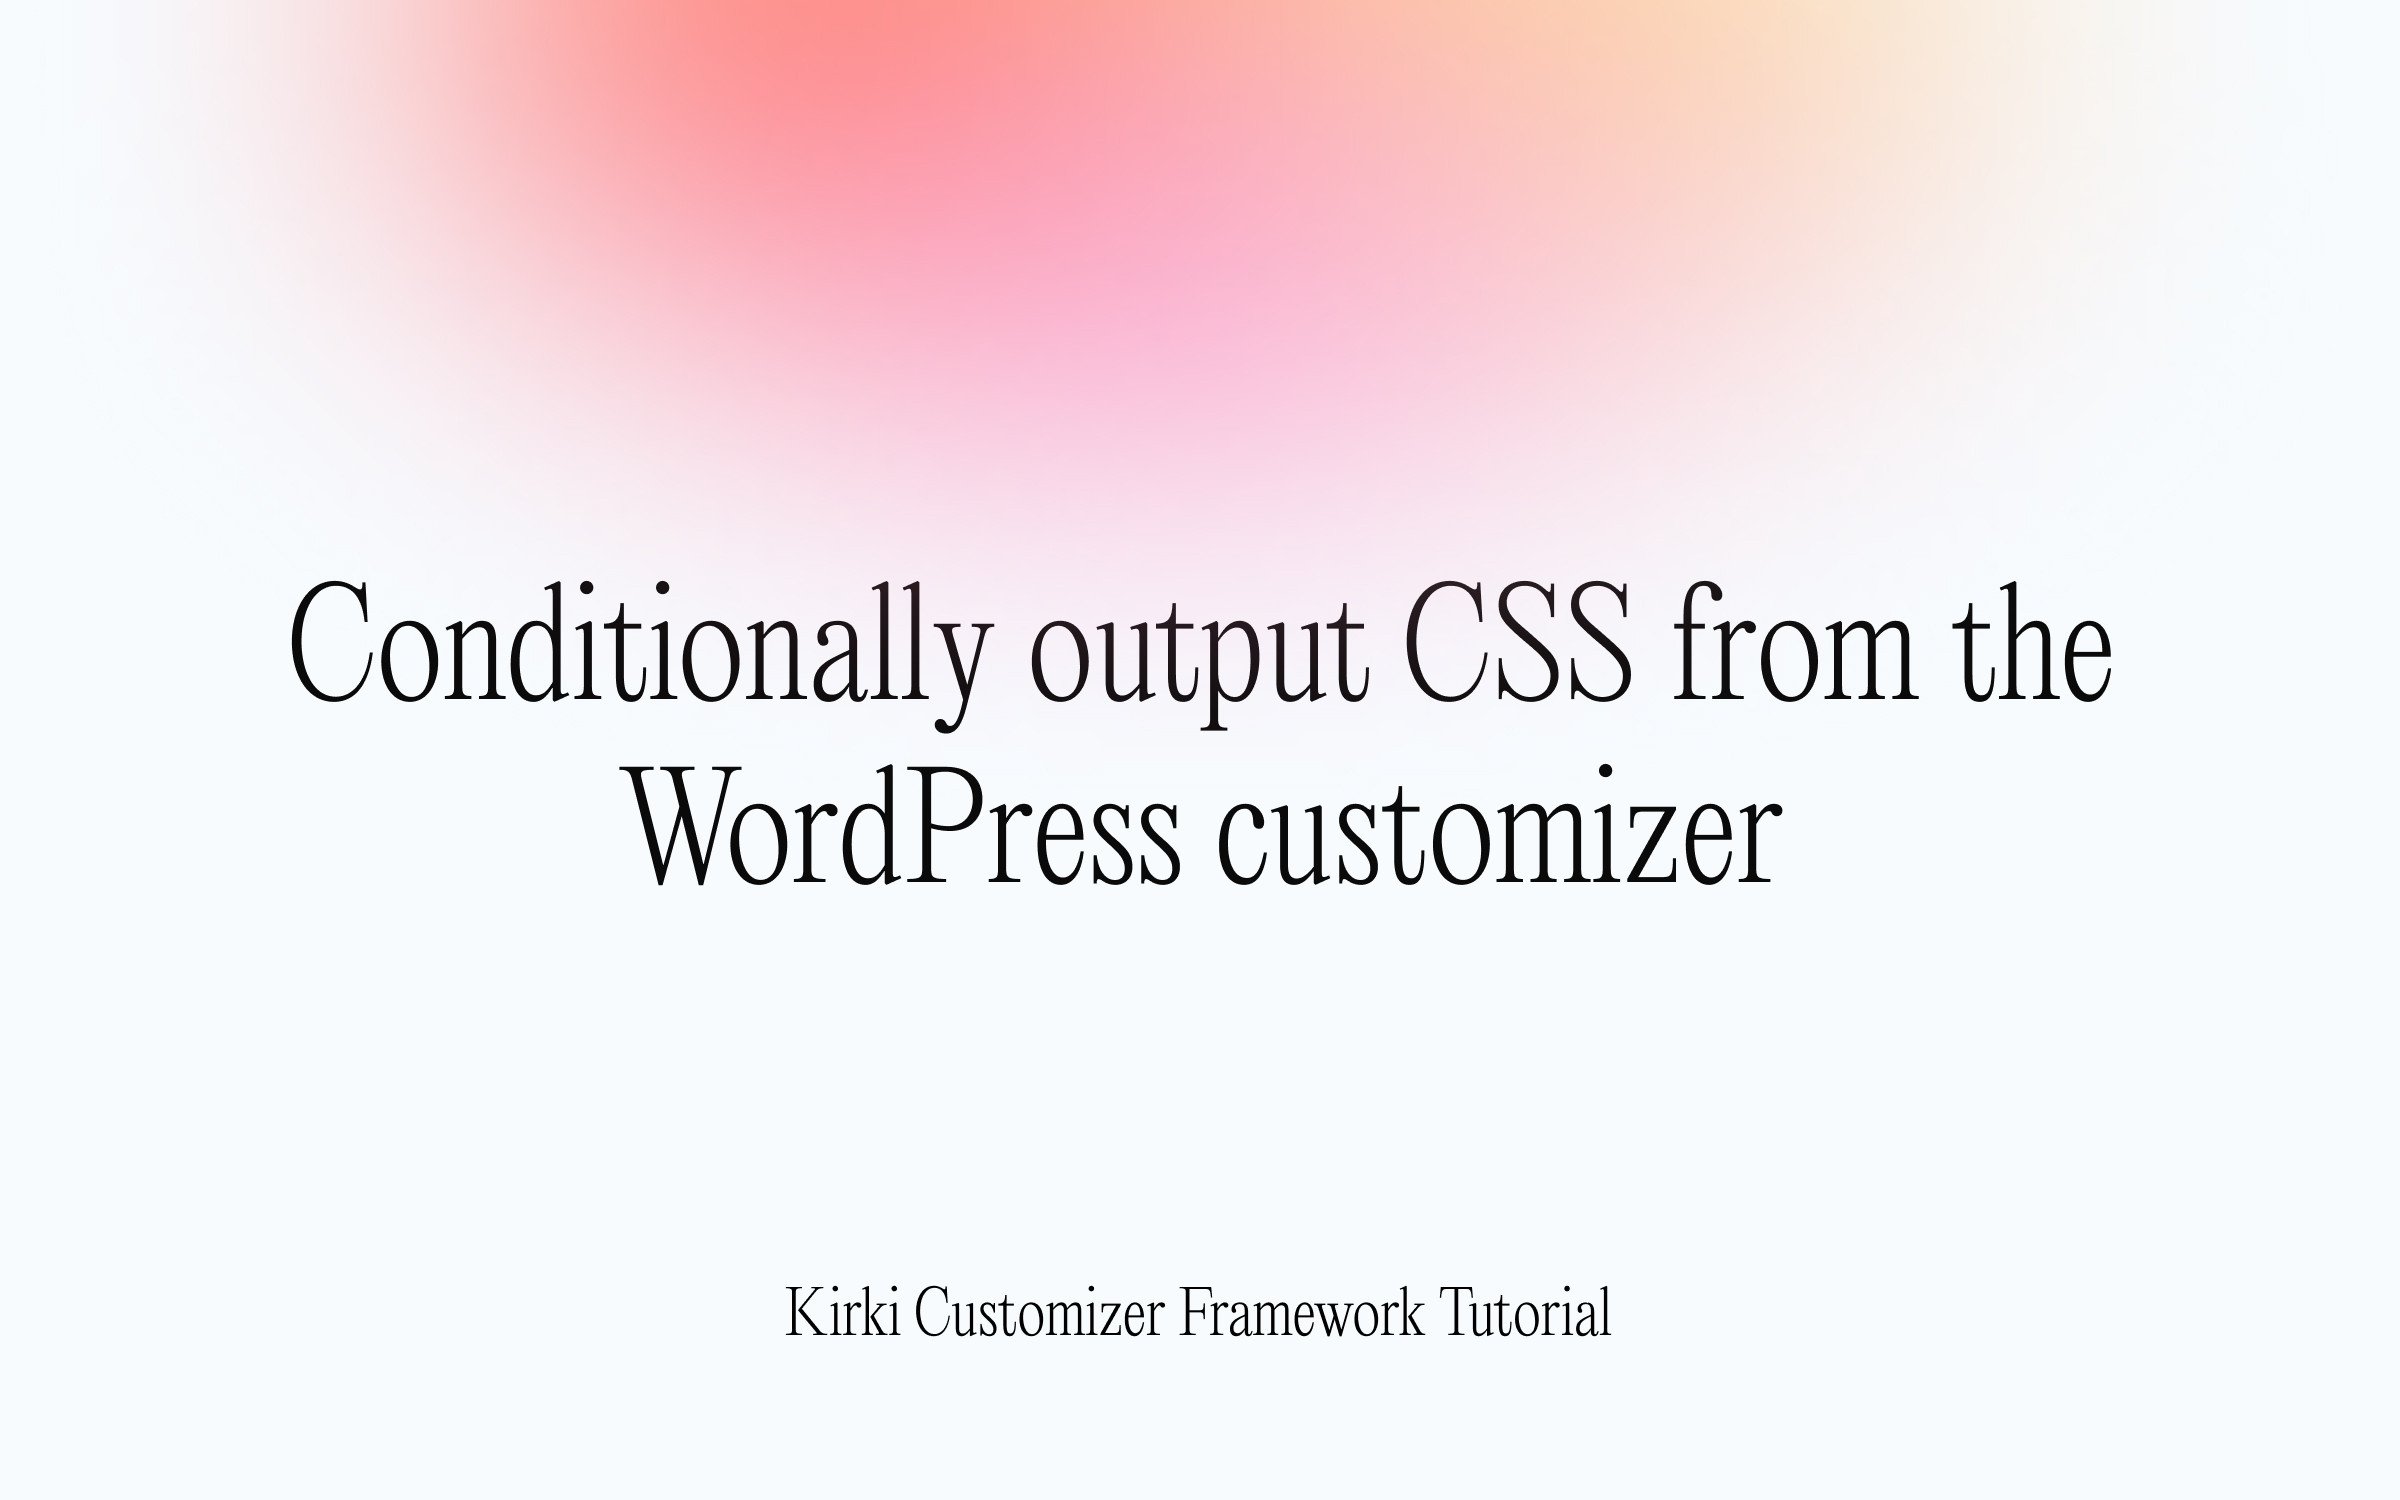 Conditionally output CSS from the customizer